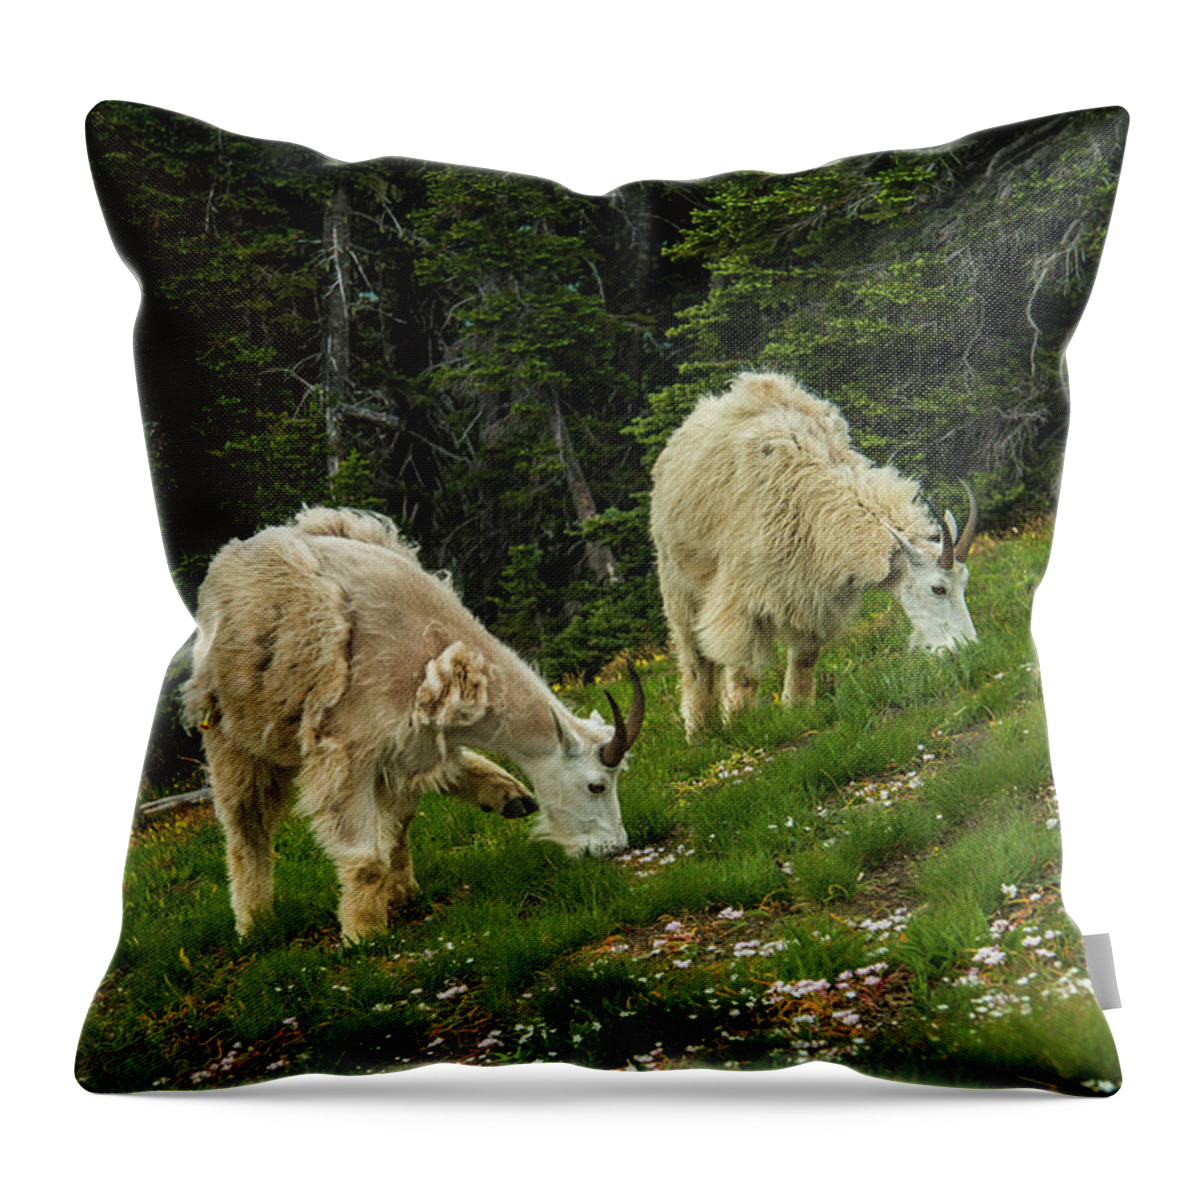 Olympic National Park Throw Pillow featuring the photograph Goat Garden by Doug Scrima